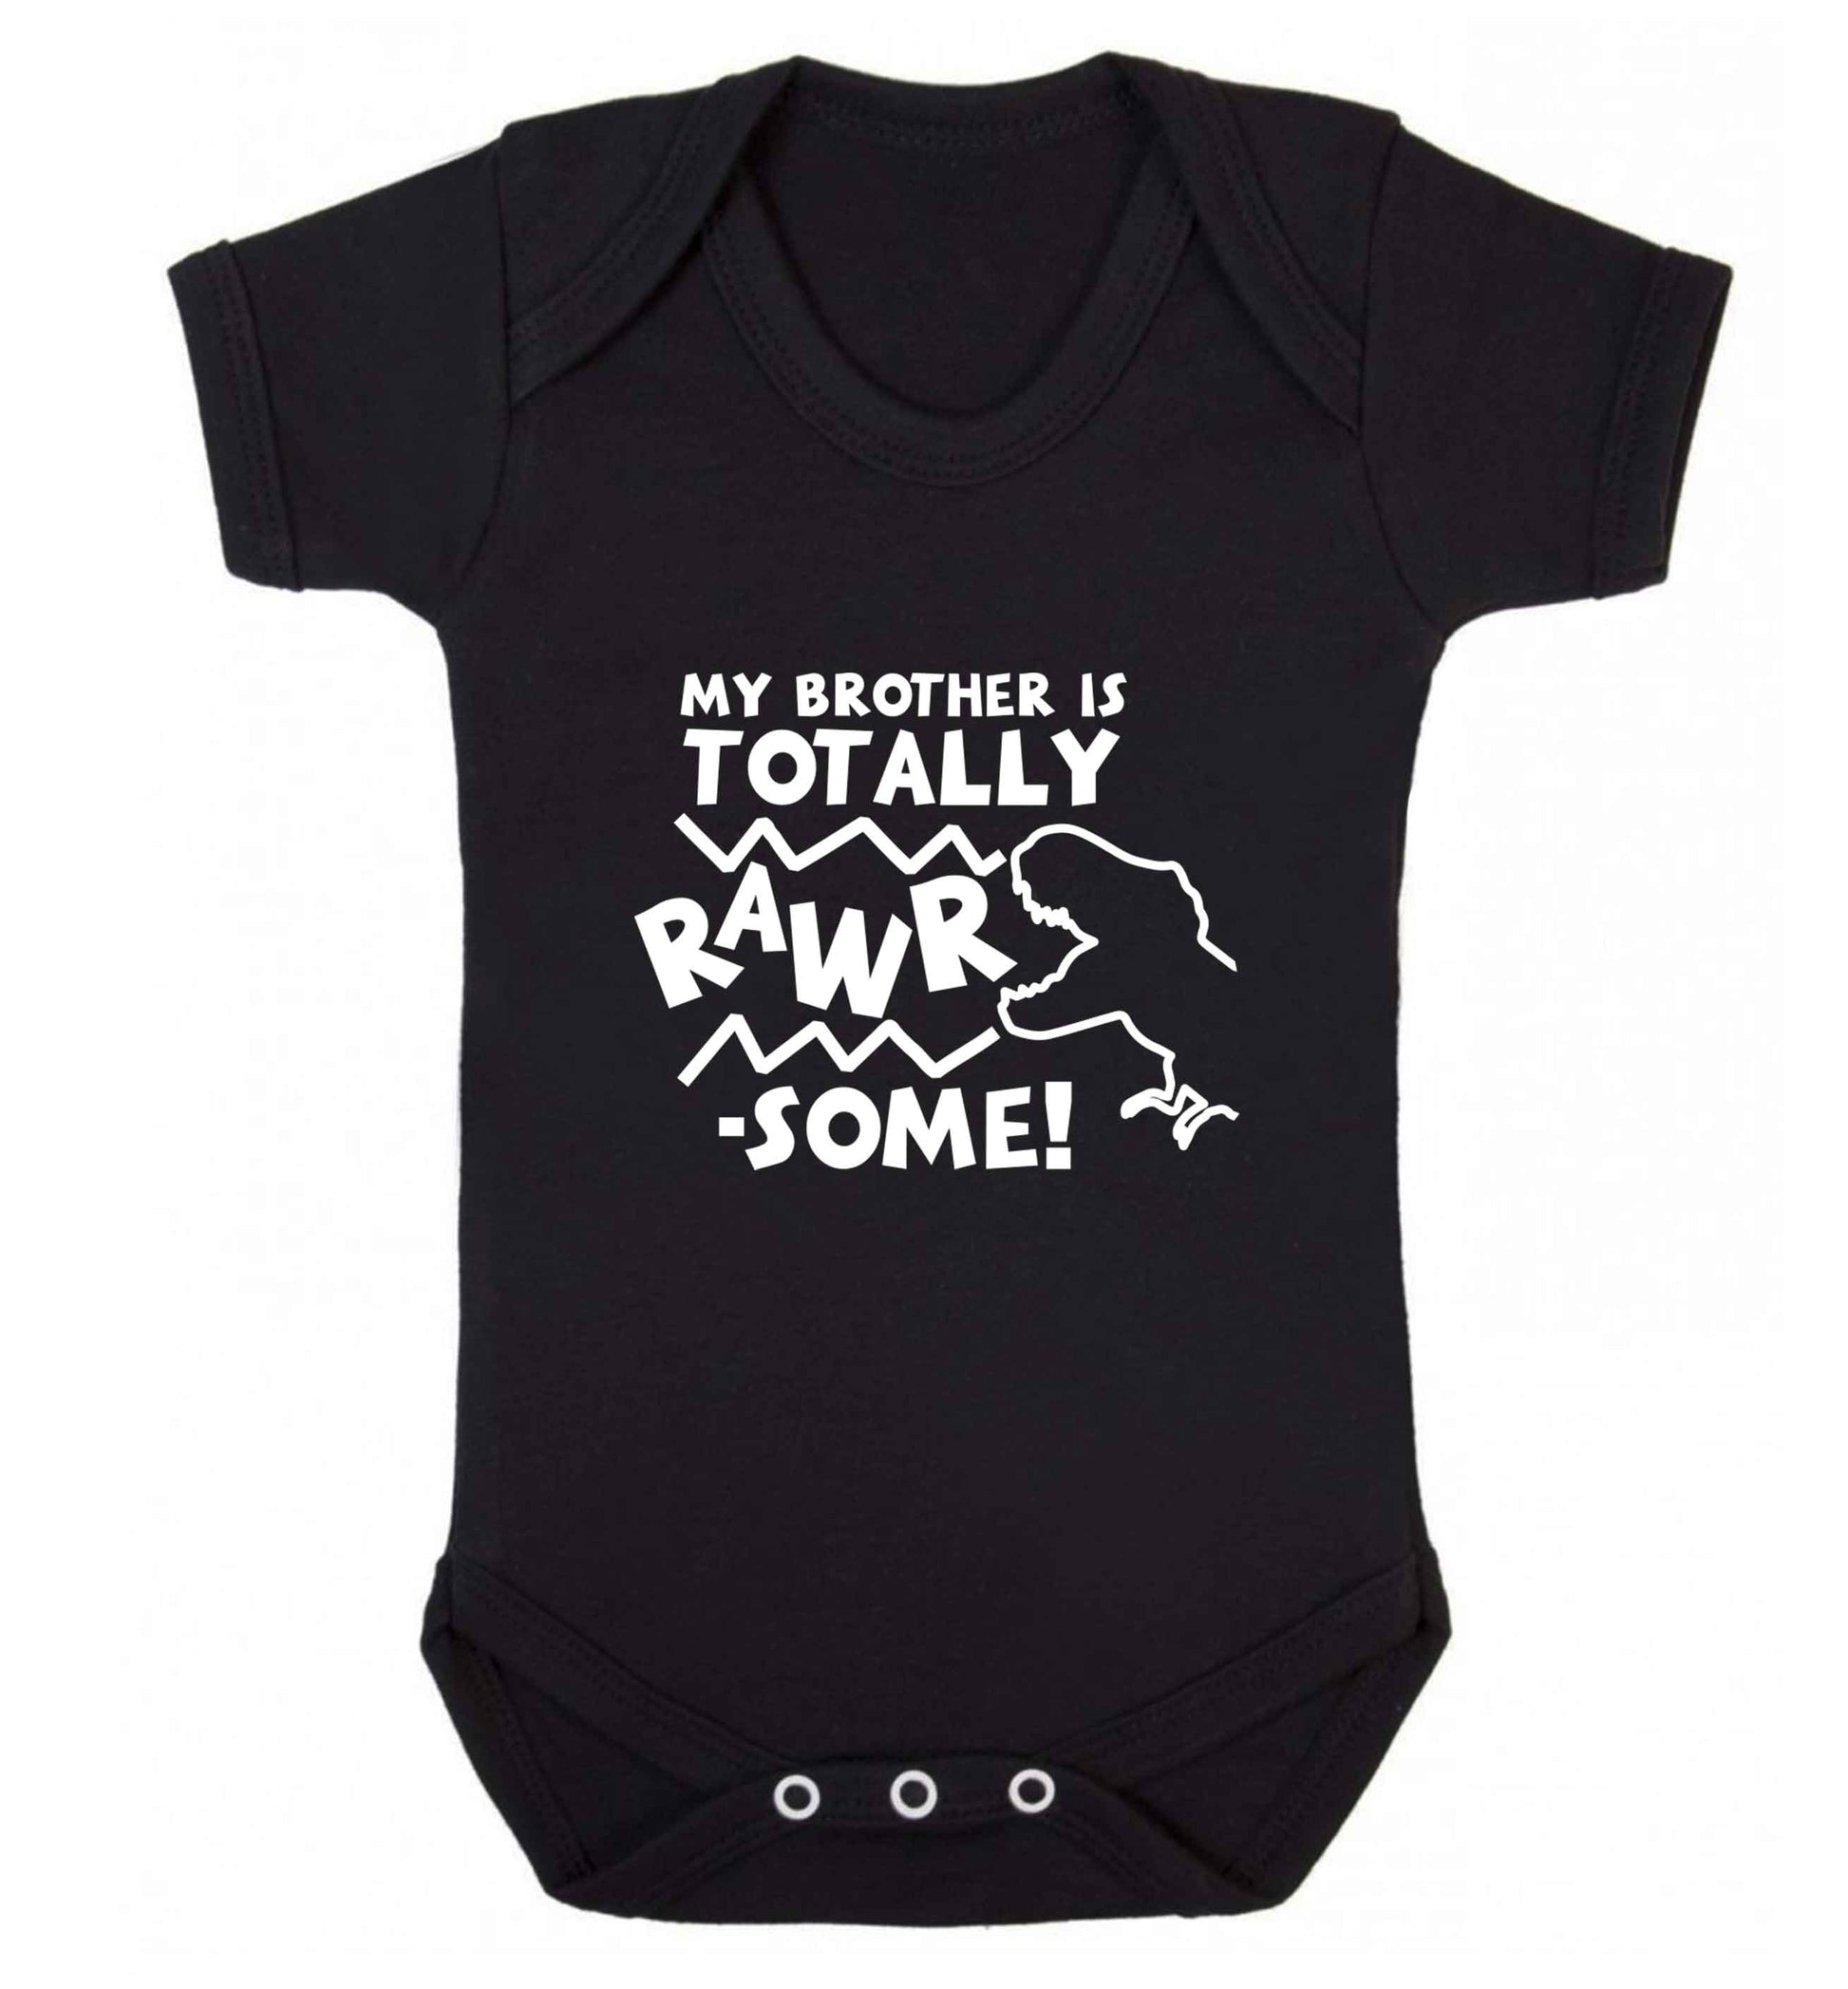 My brother is totally rawrsome baby vest black 18-24 months